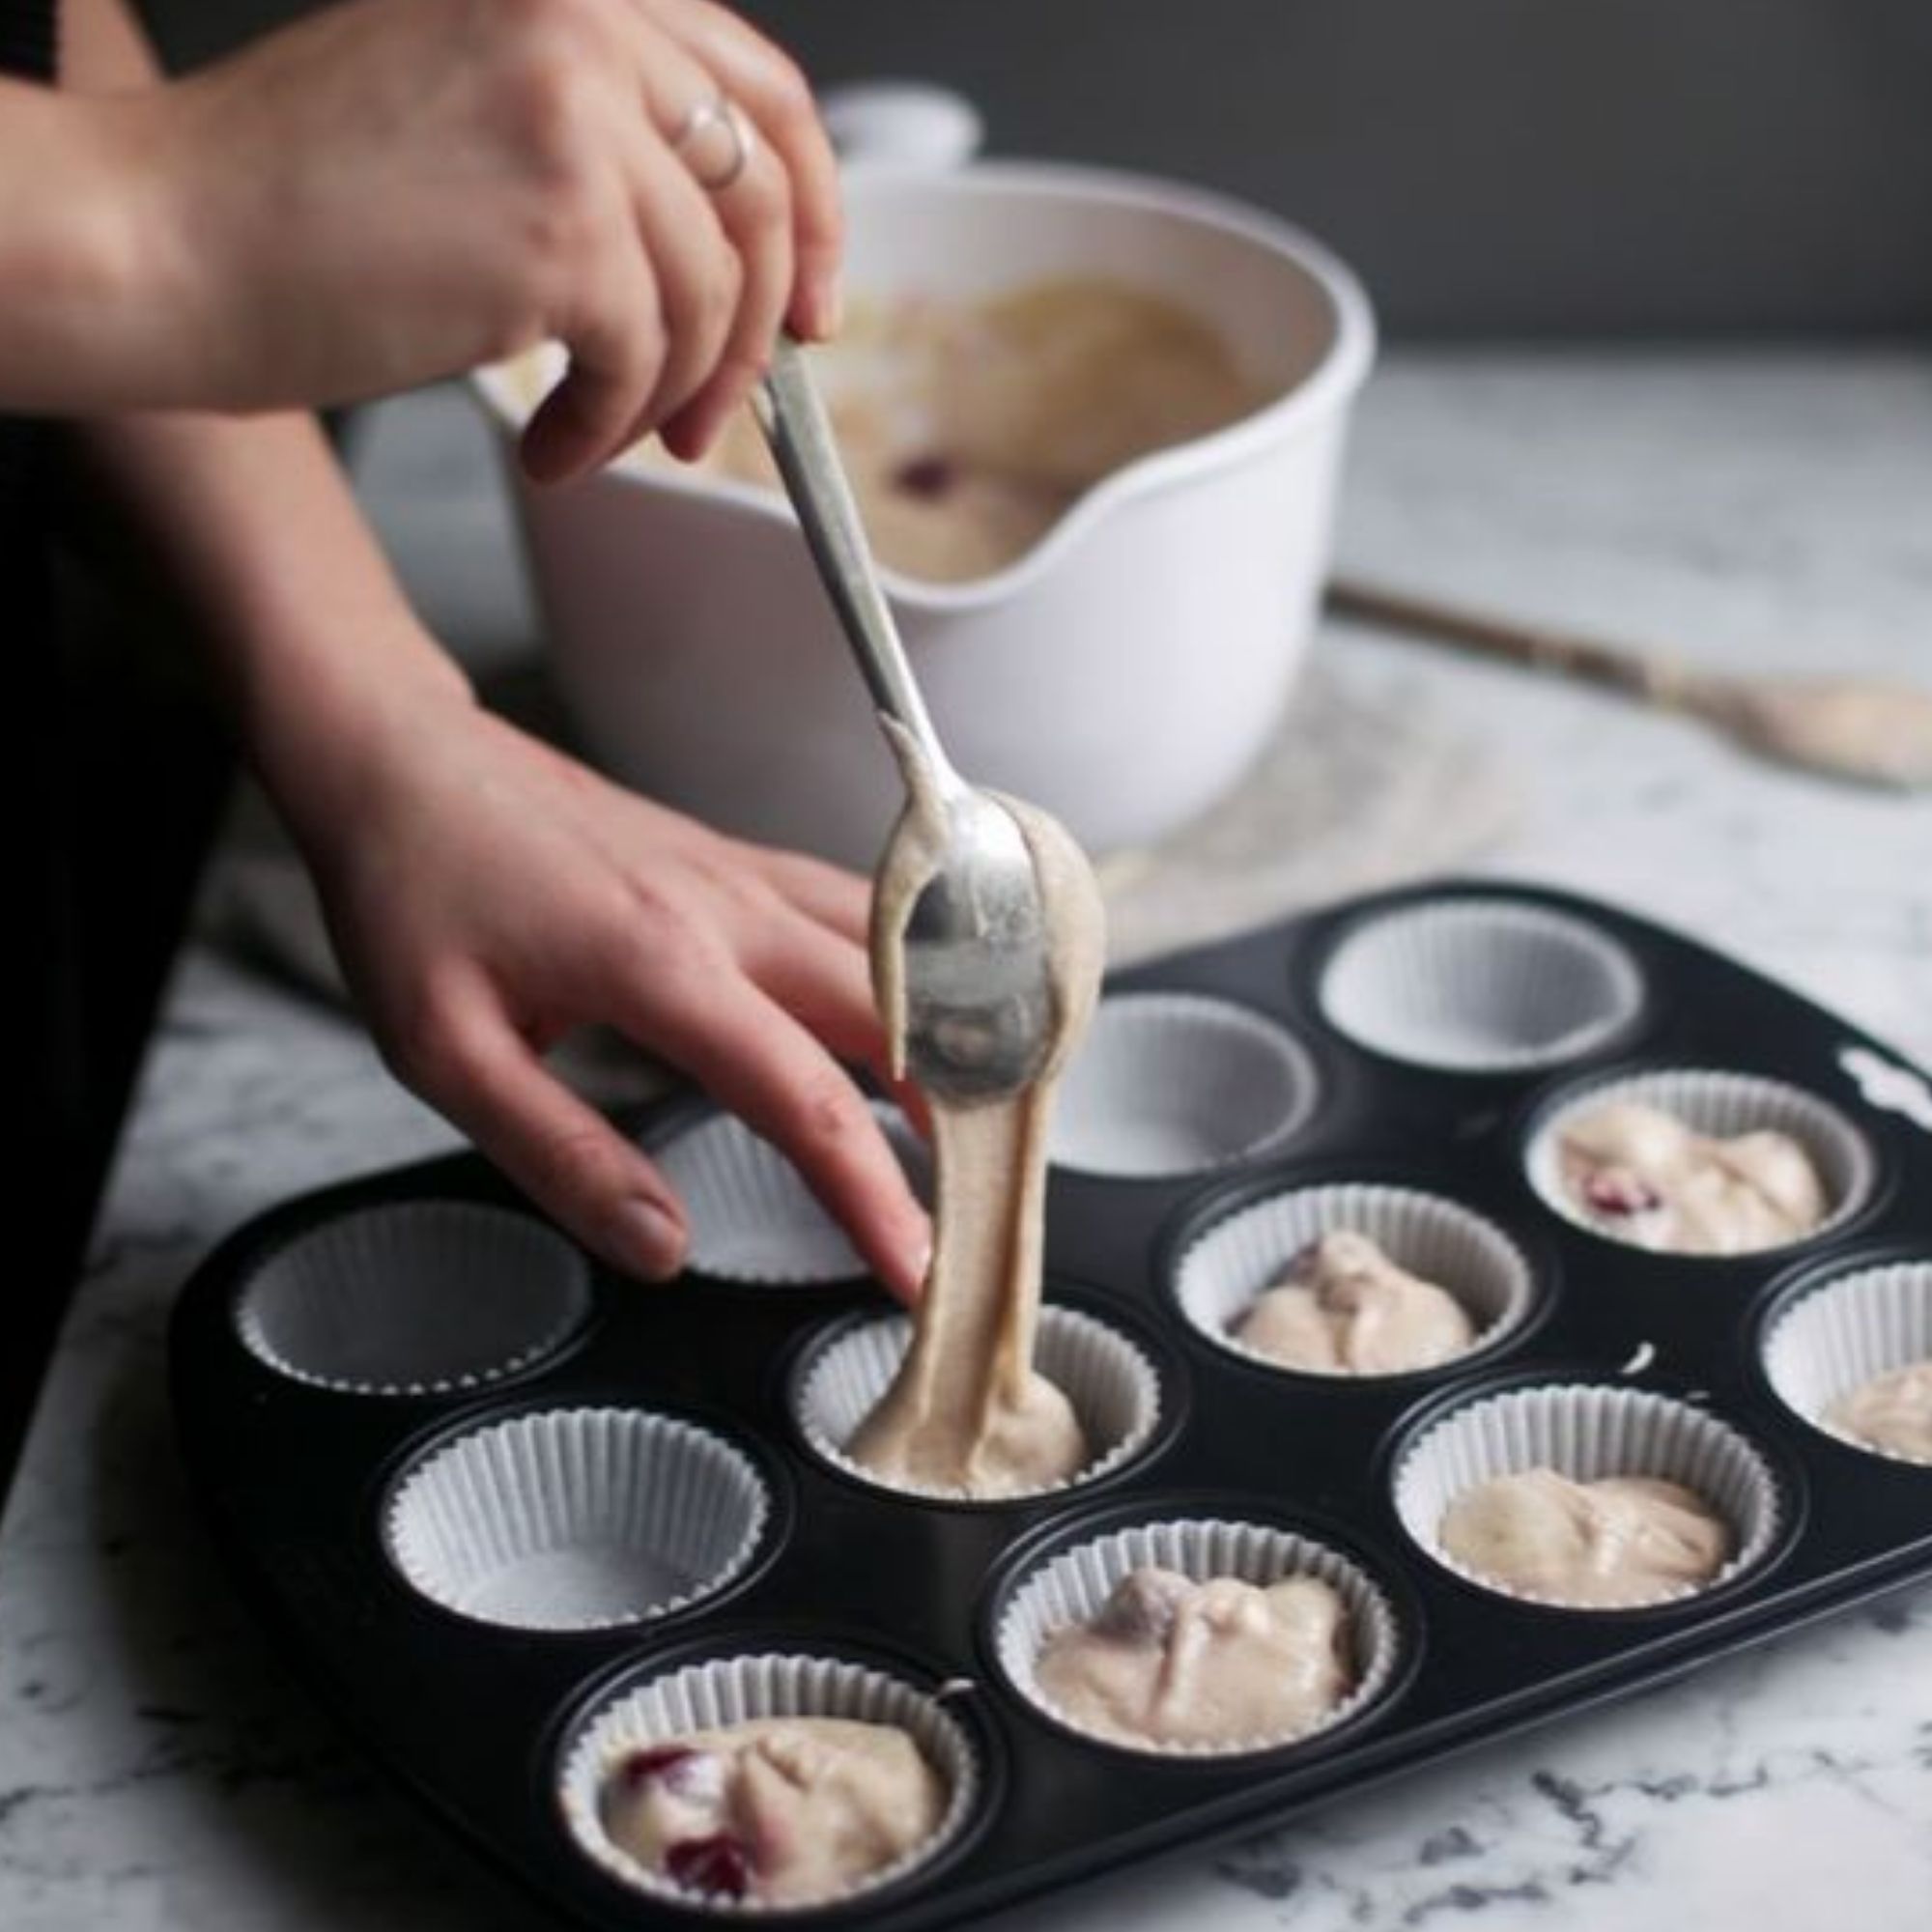 Mixed dough being poured into cupcake tray